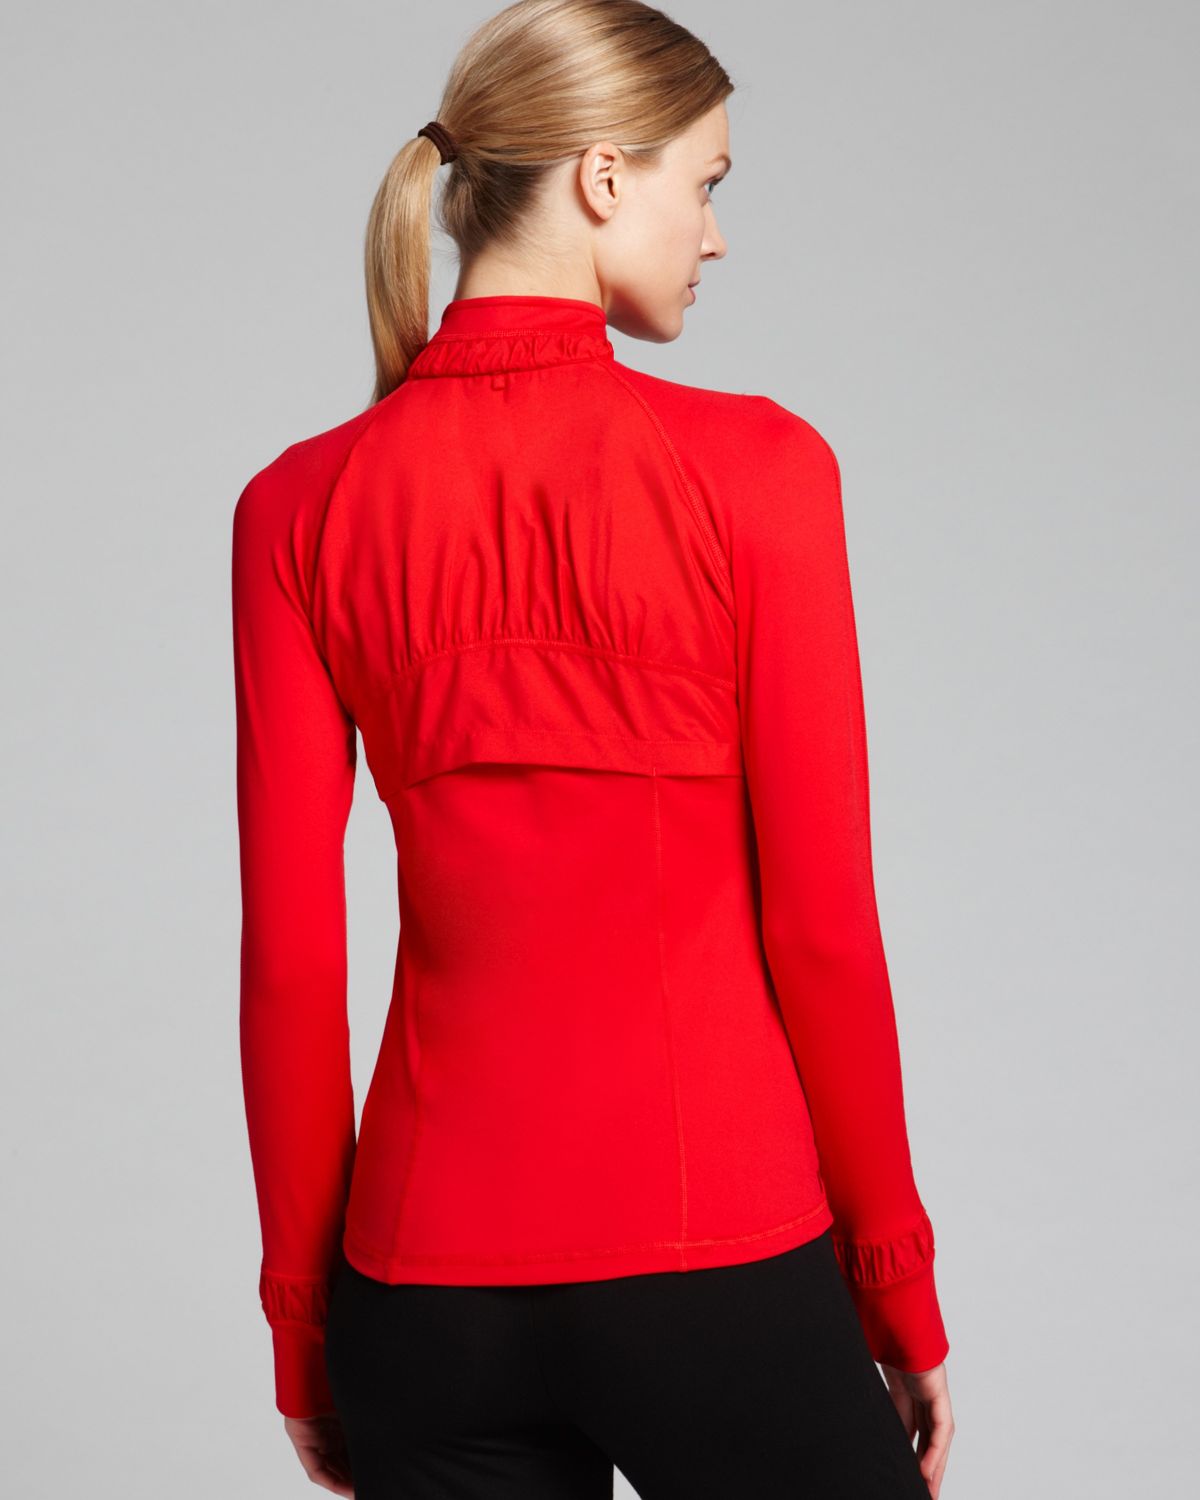 SPANX Active Contour Jacket Red 